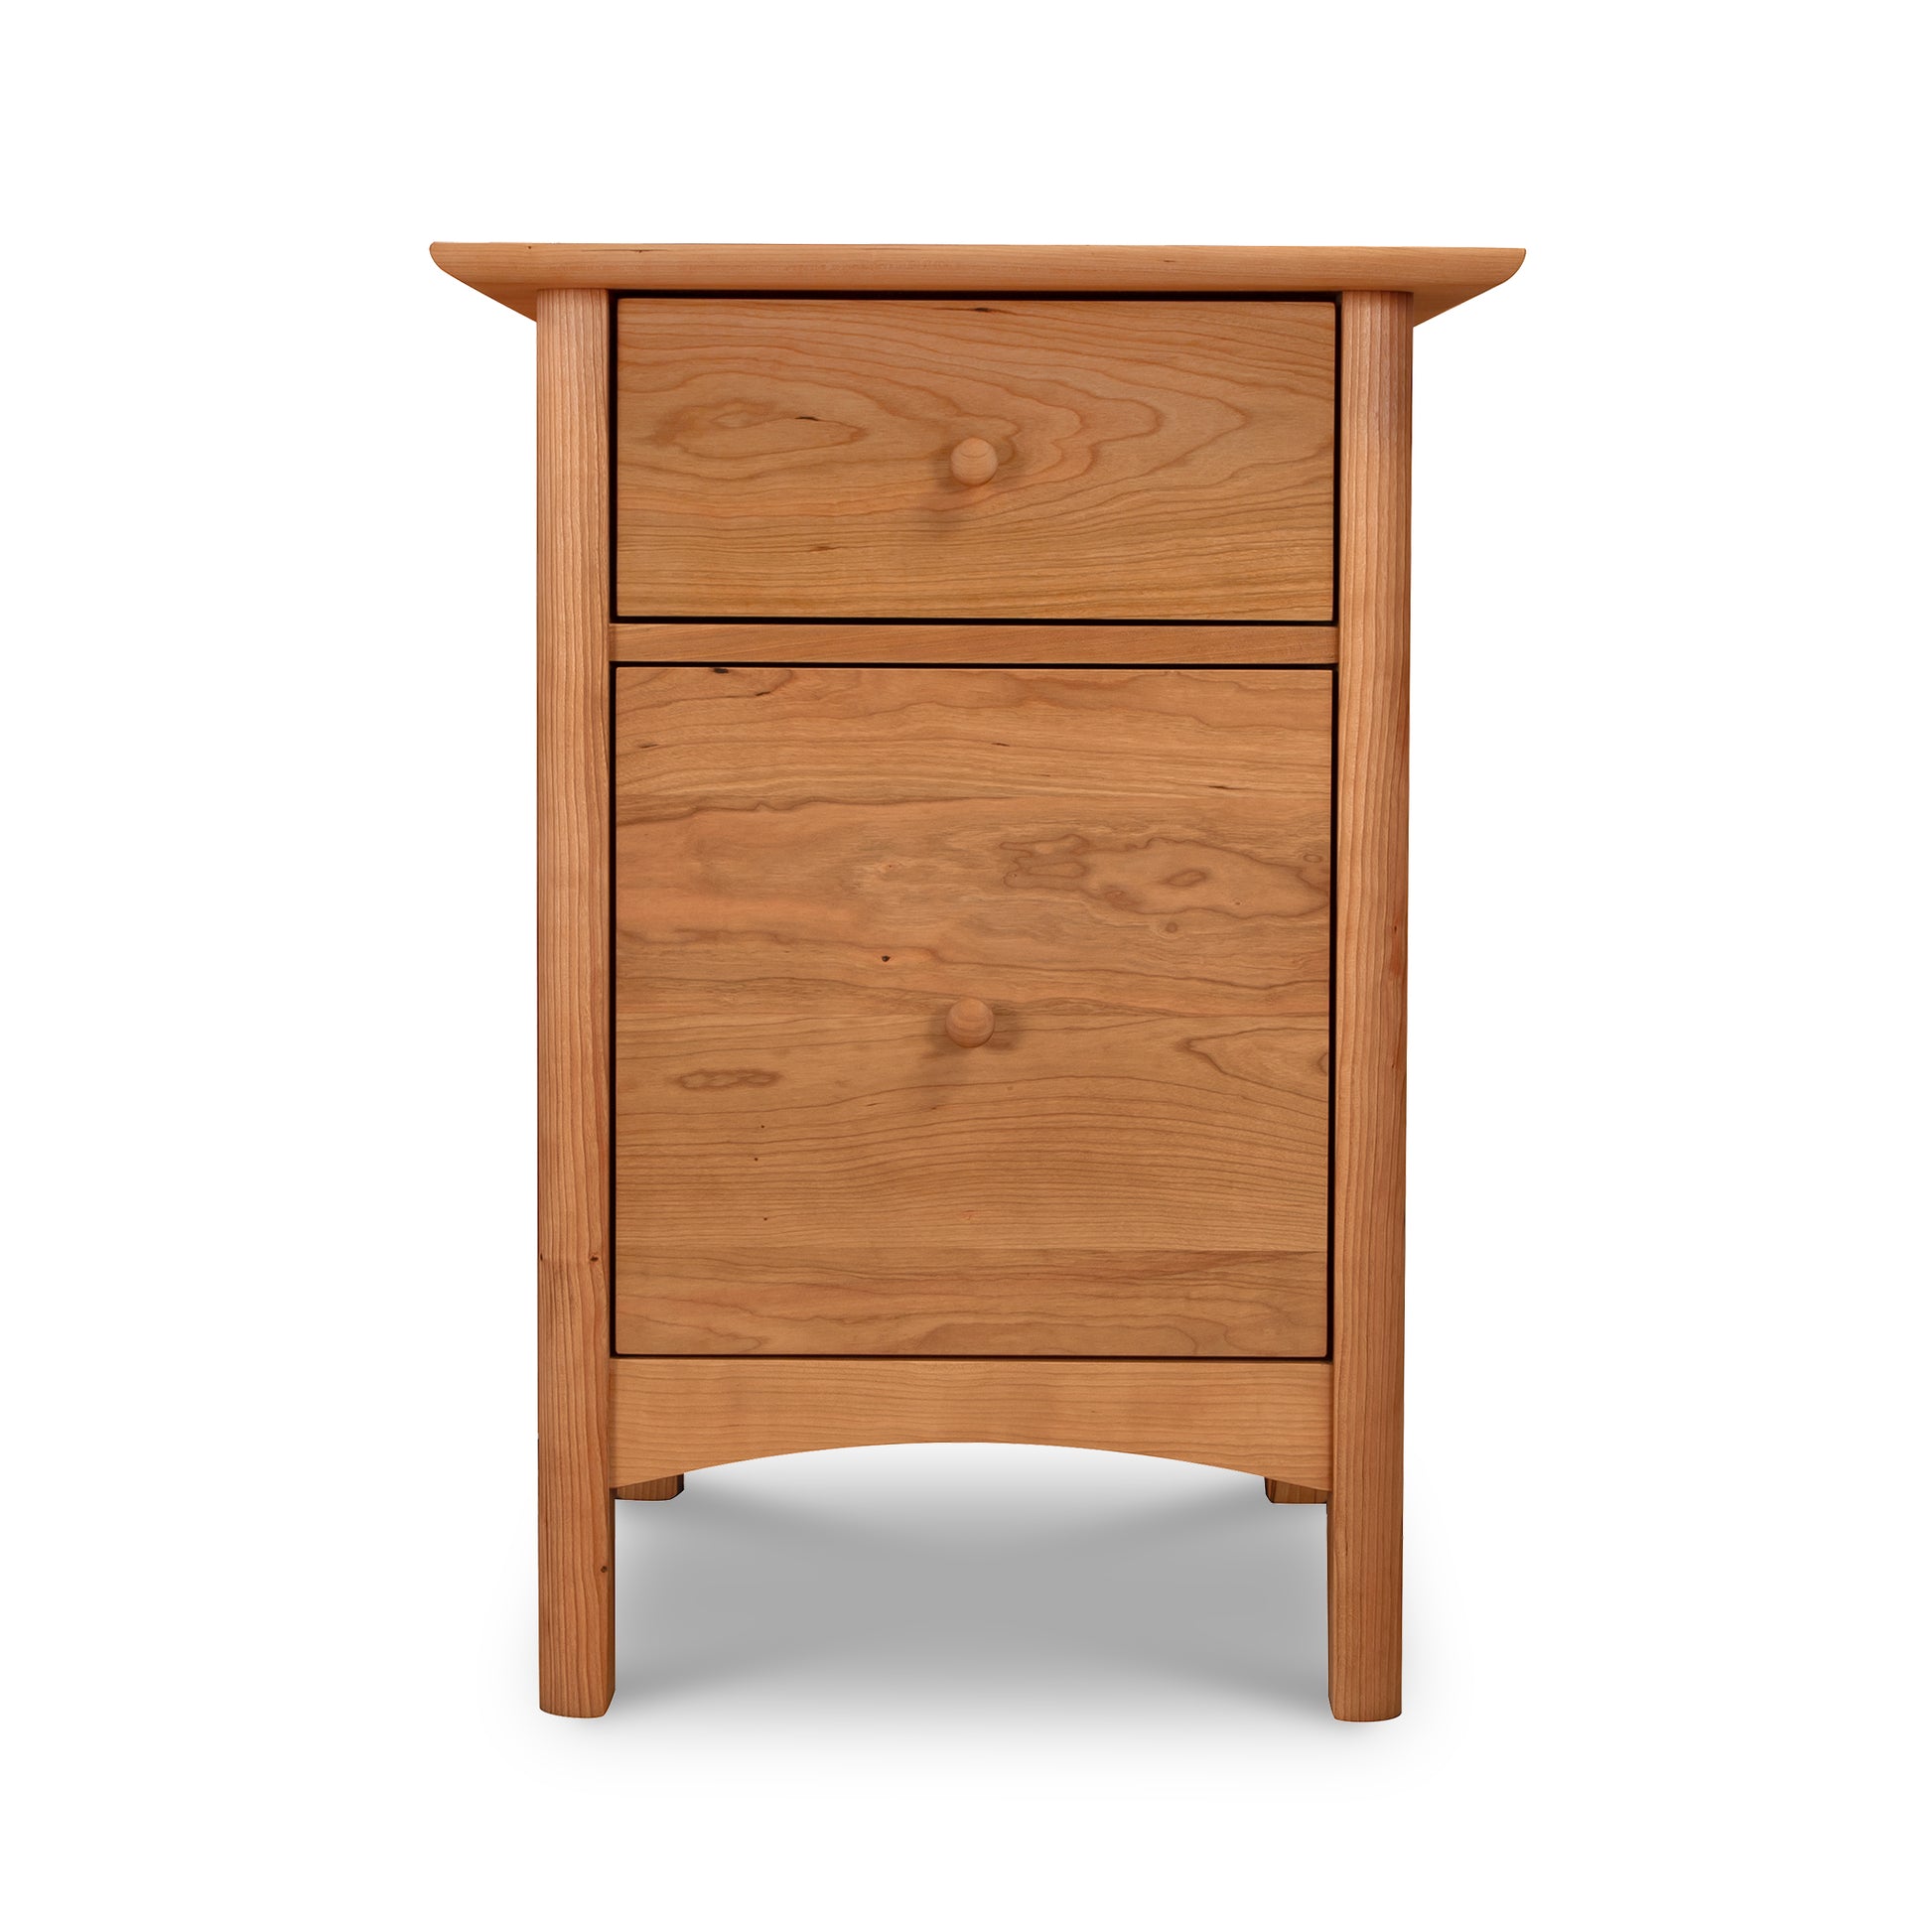 Heartwood Shaker Vertical File Cabinet from Vermont Furniture Designs with an eco-friendly oil finish isolated on a white background.